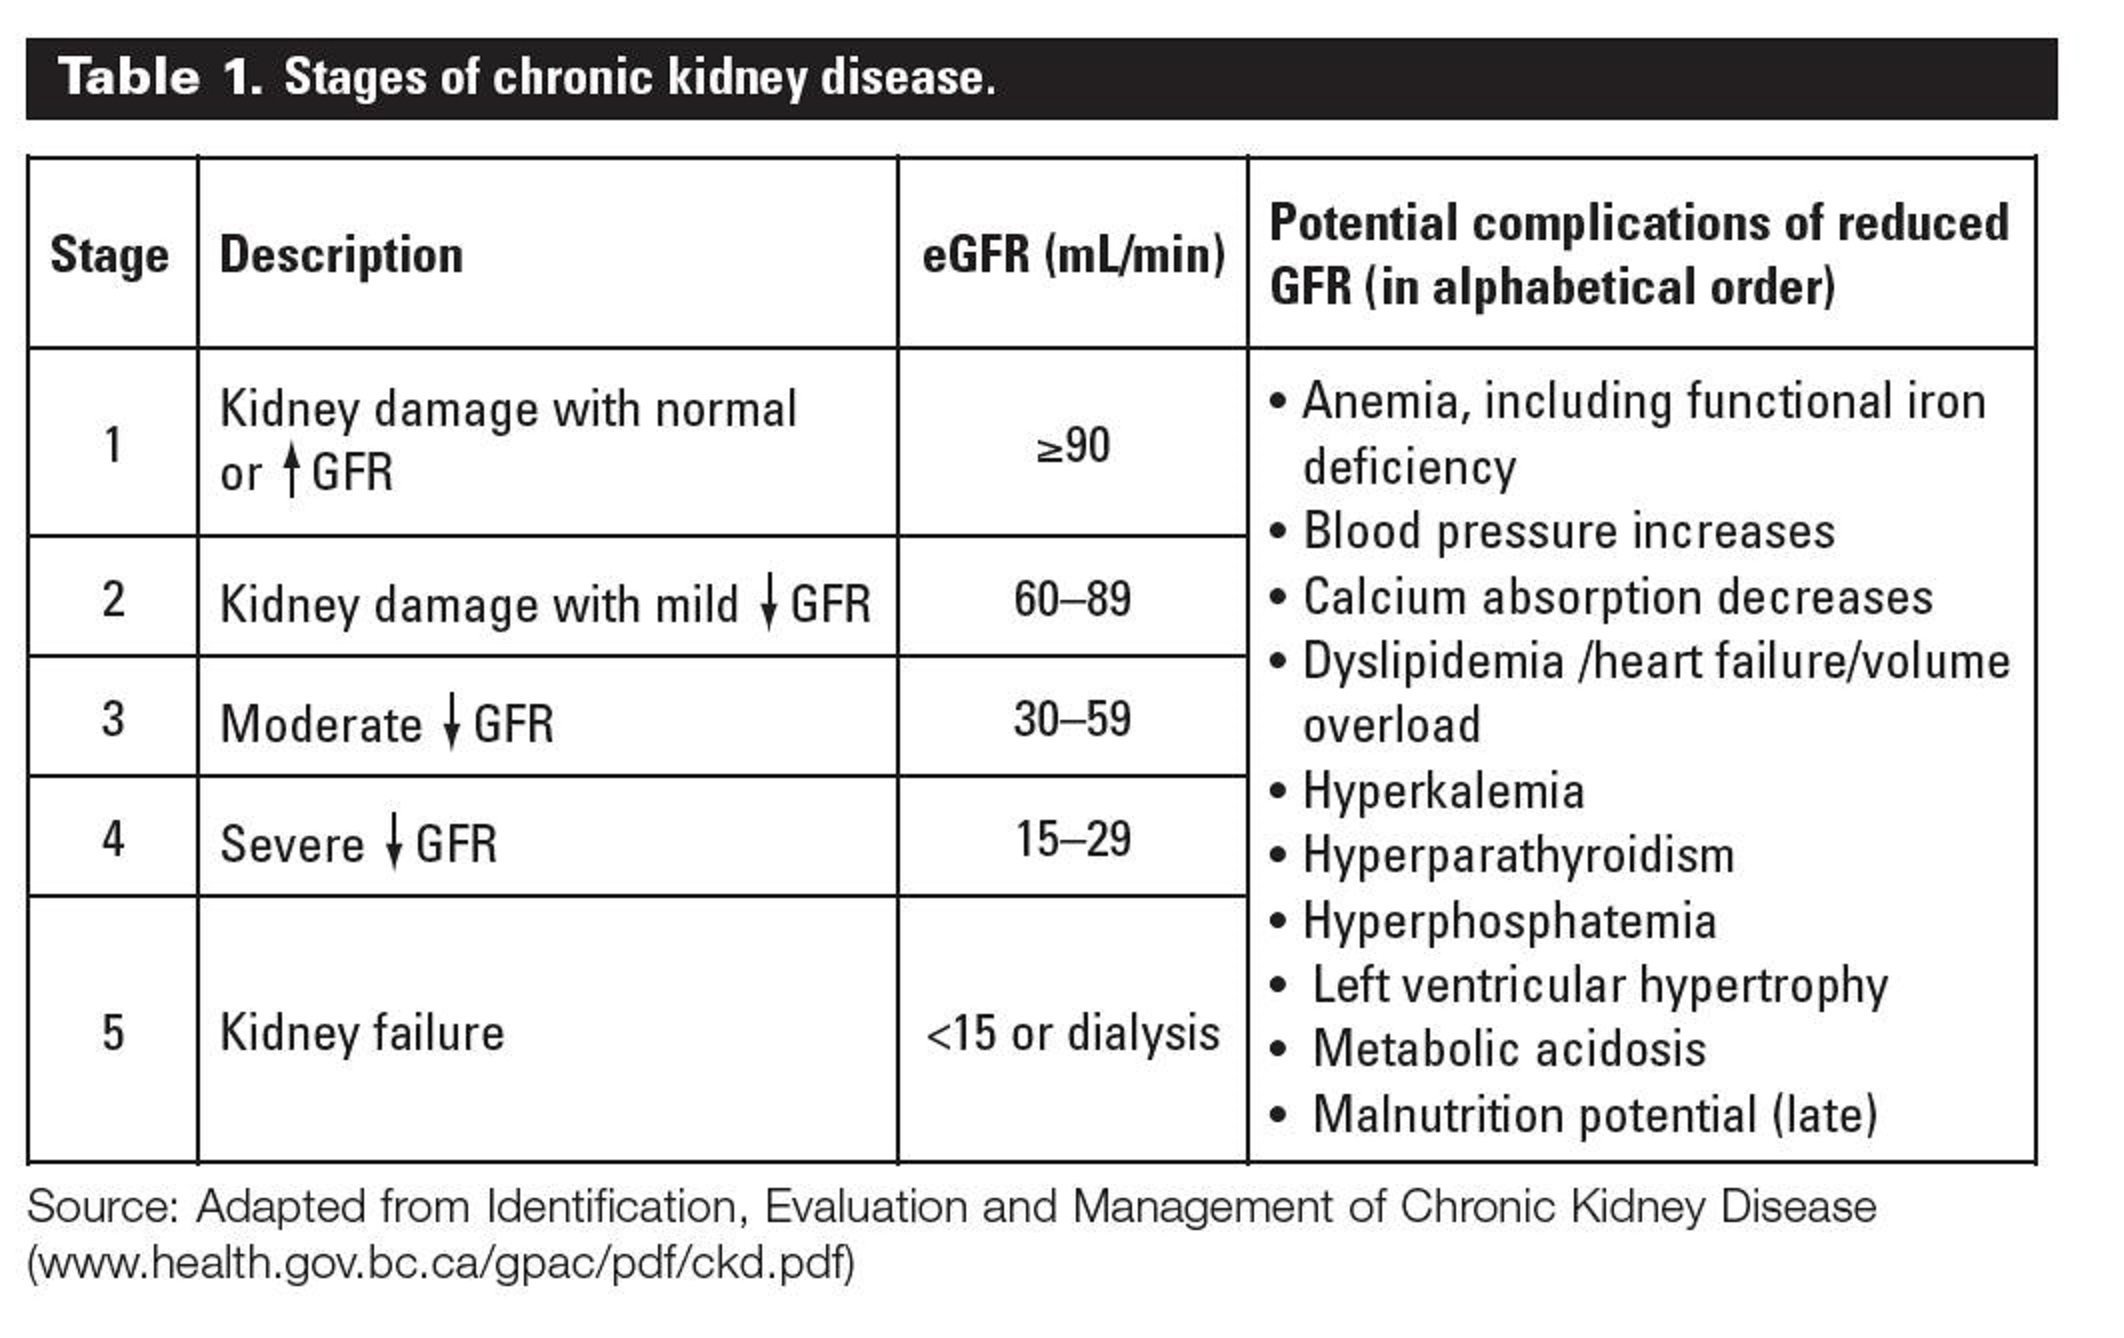 Overview of Chronic Kidney Disease Stages